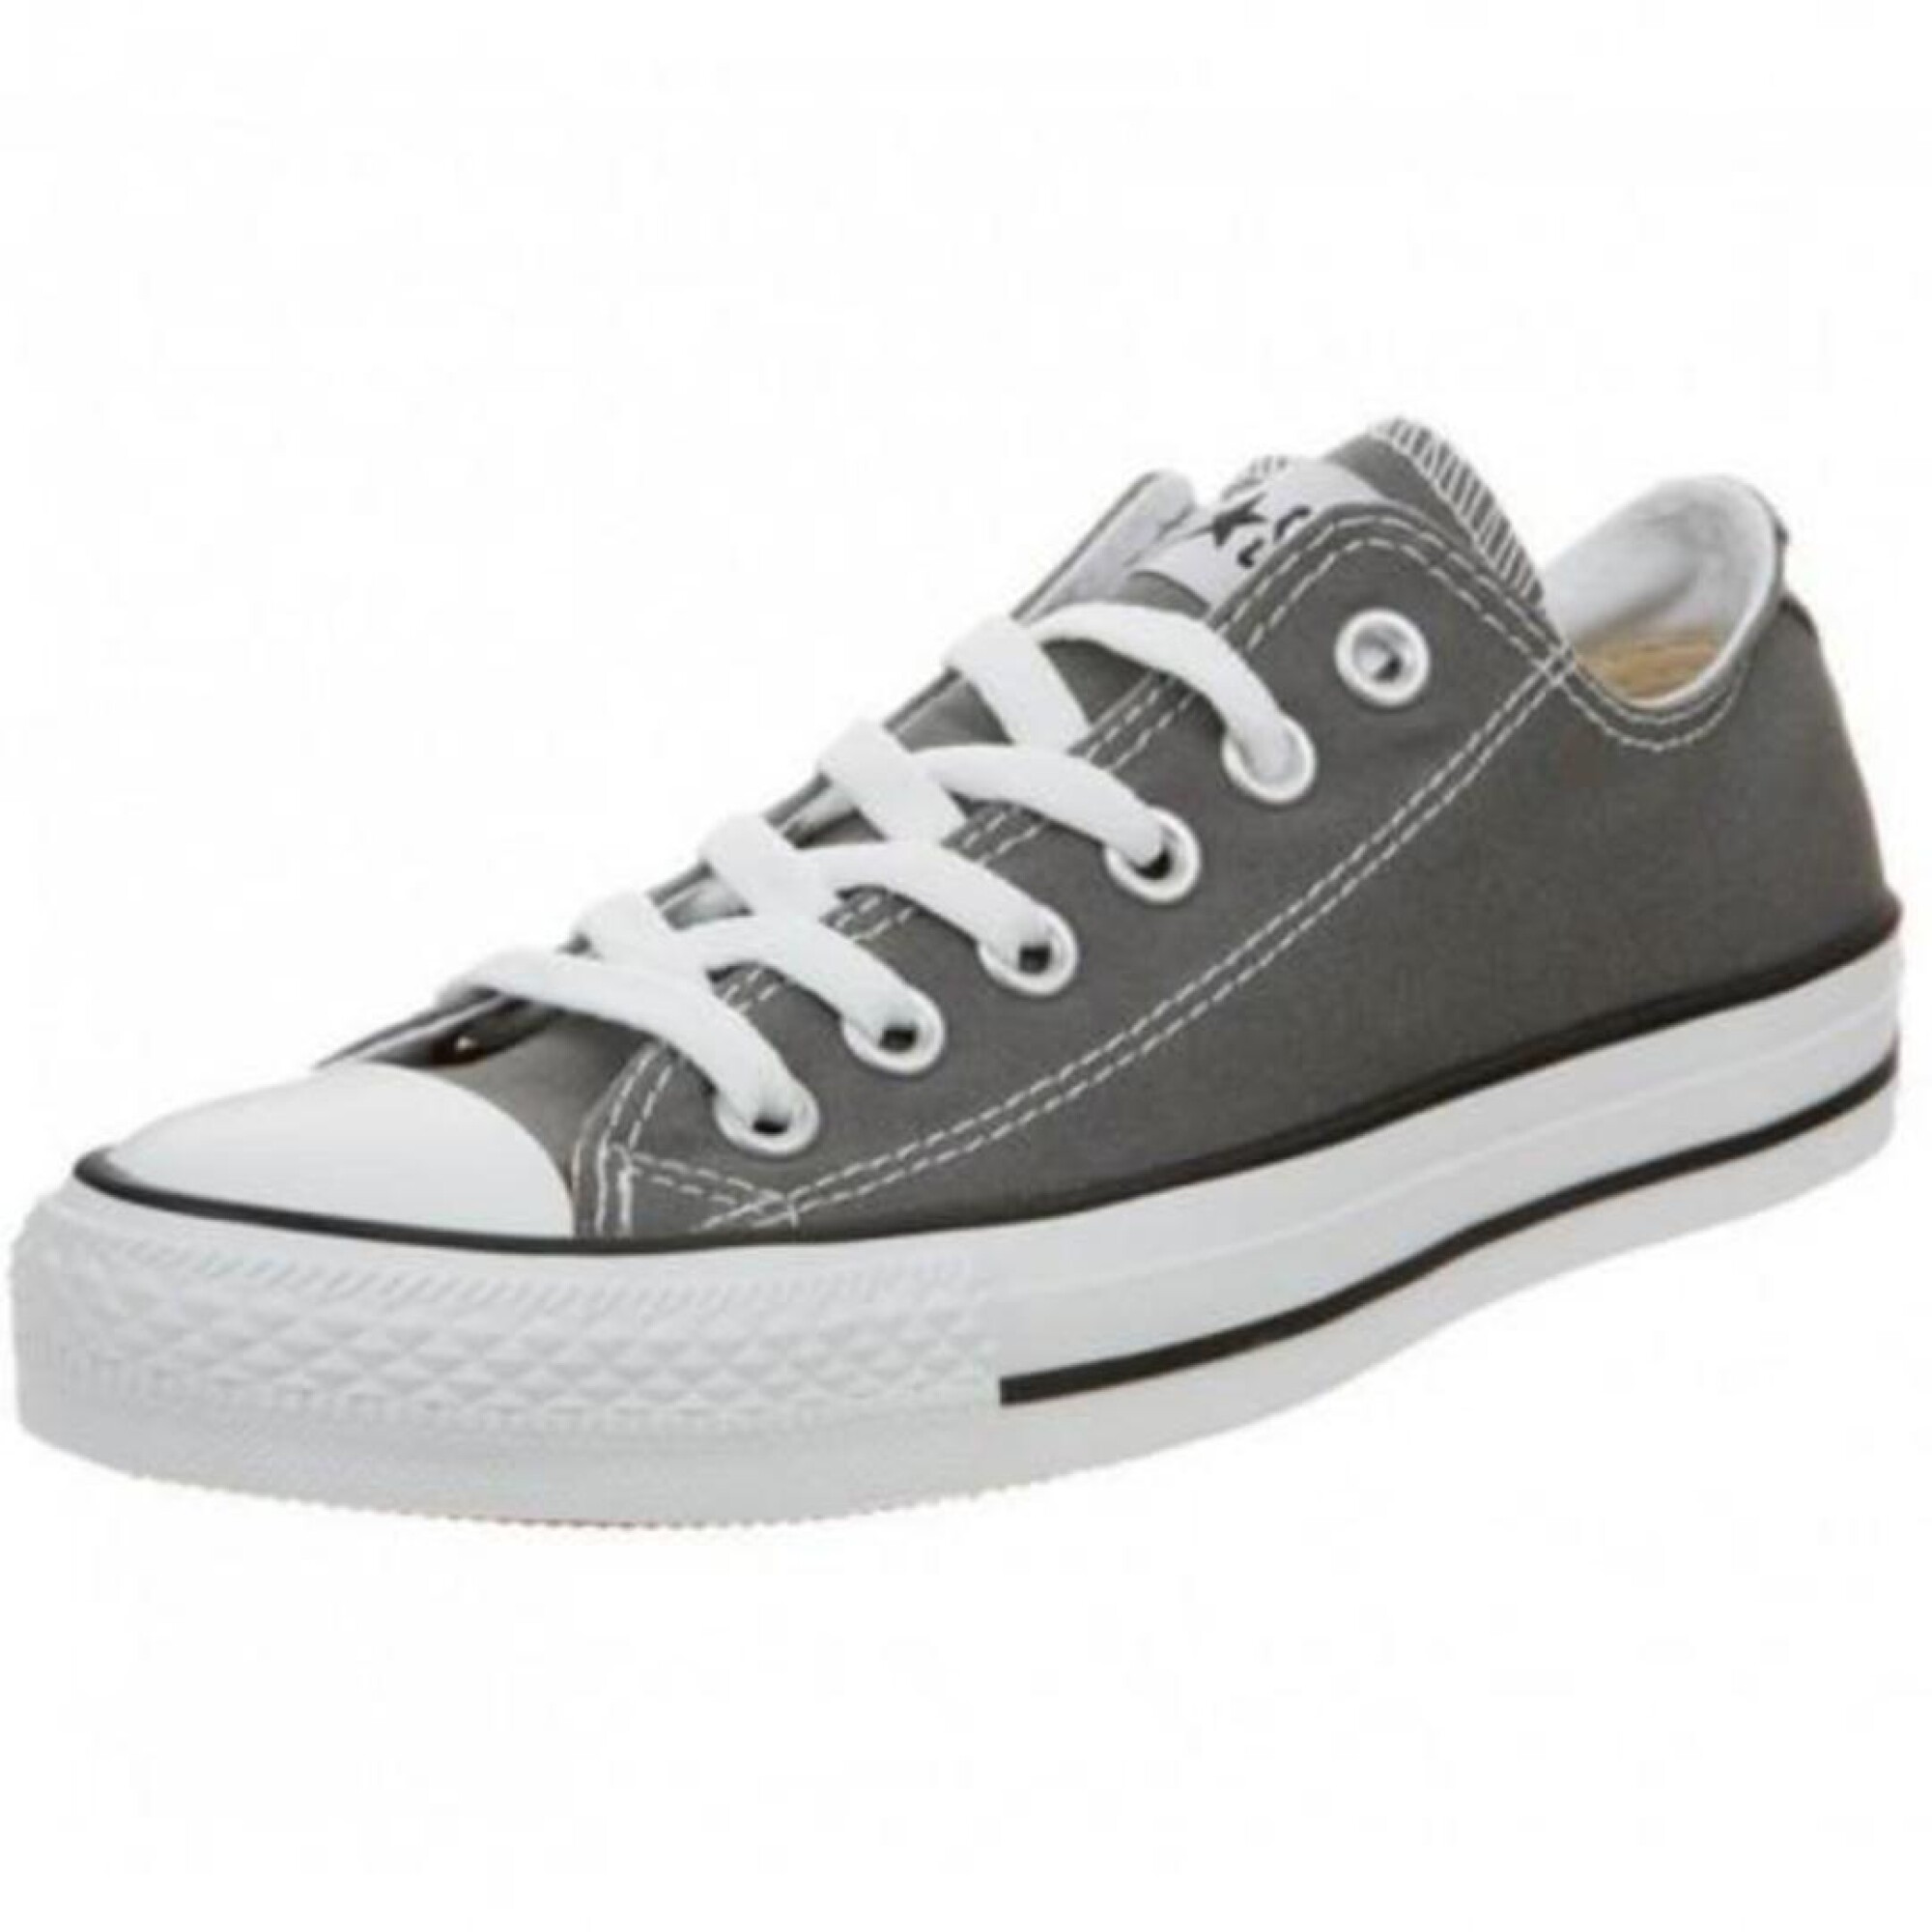 Championes Converse All Star Grises 152000B - Sin color موقع اكواب